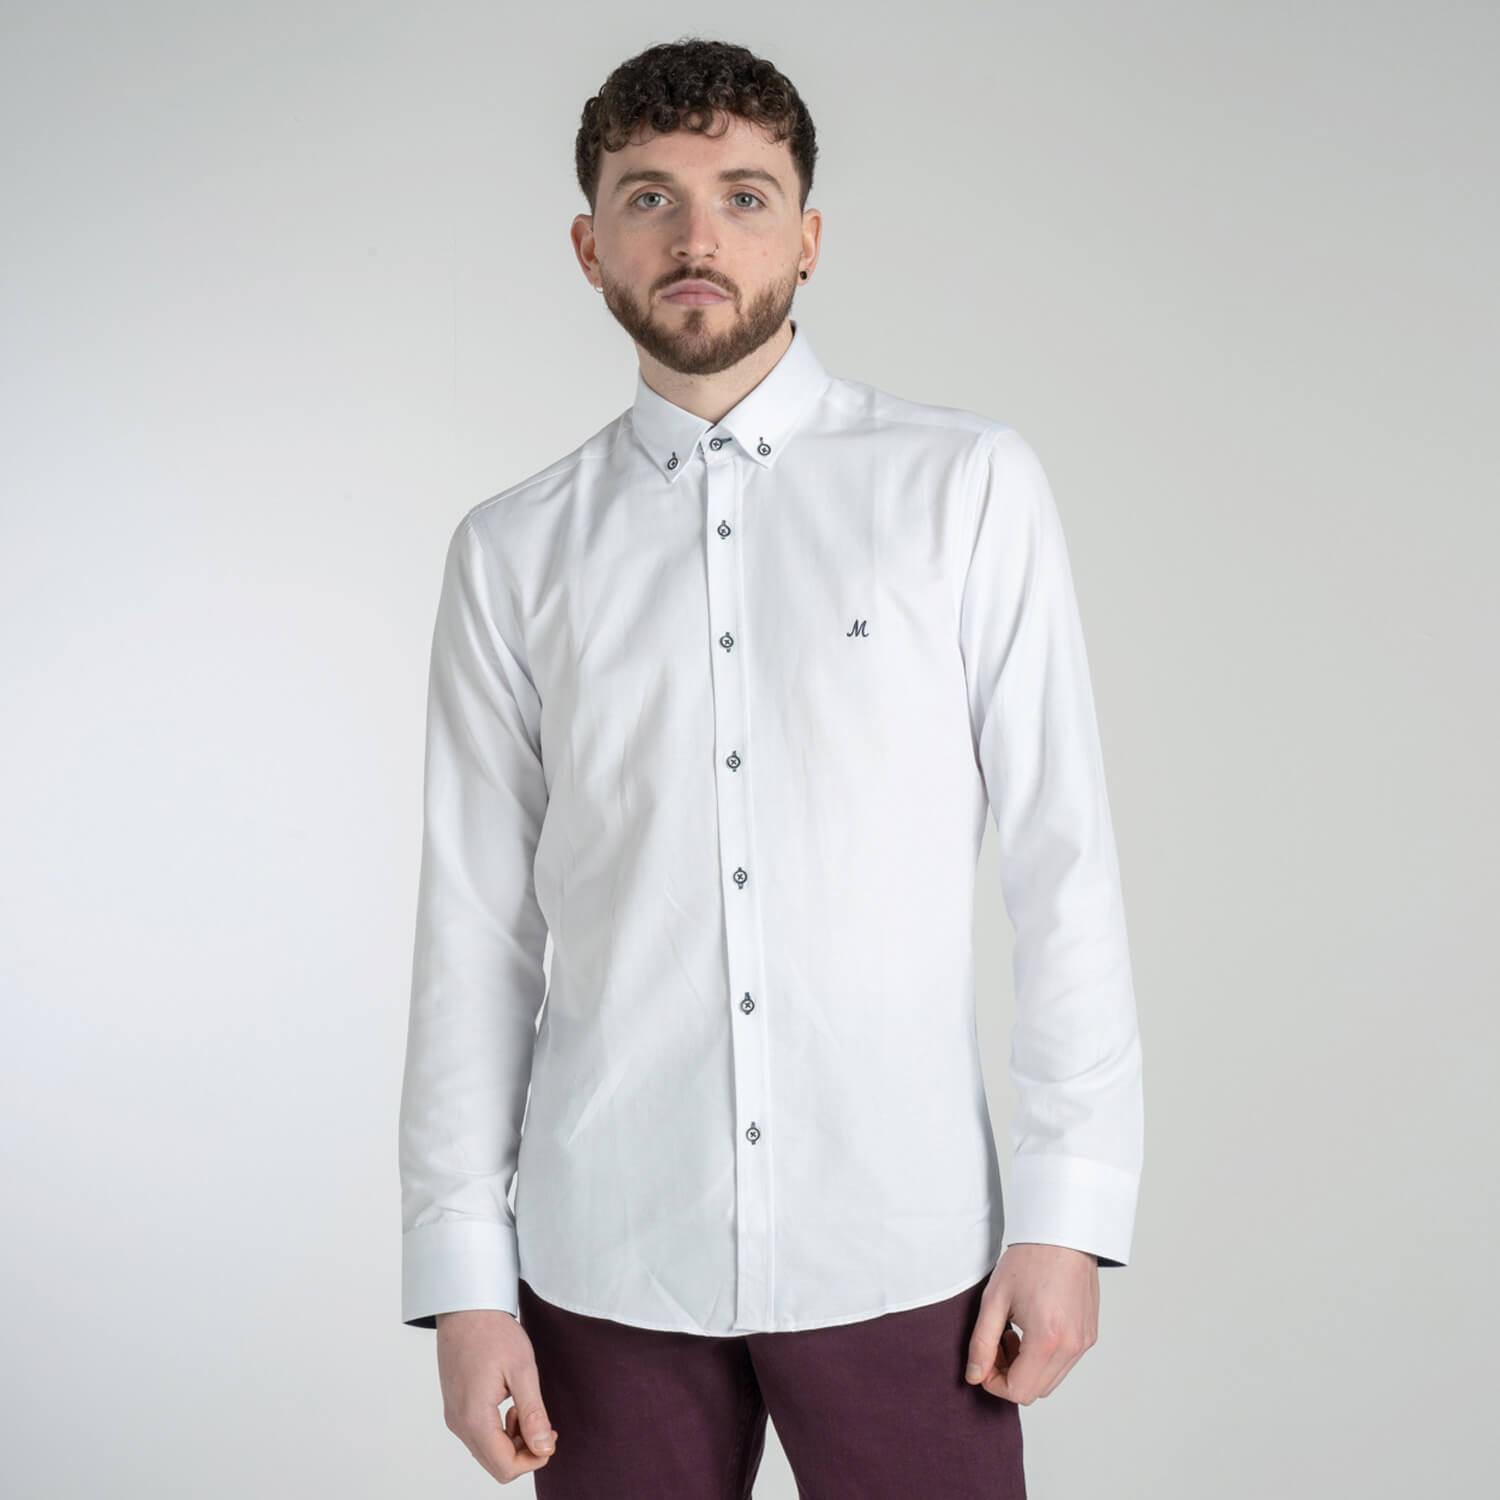 Mineral Lolland Long-sleeve Shirt - White 1 Shaws Department Stores